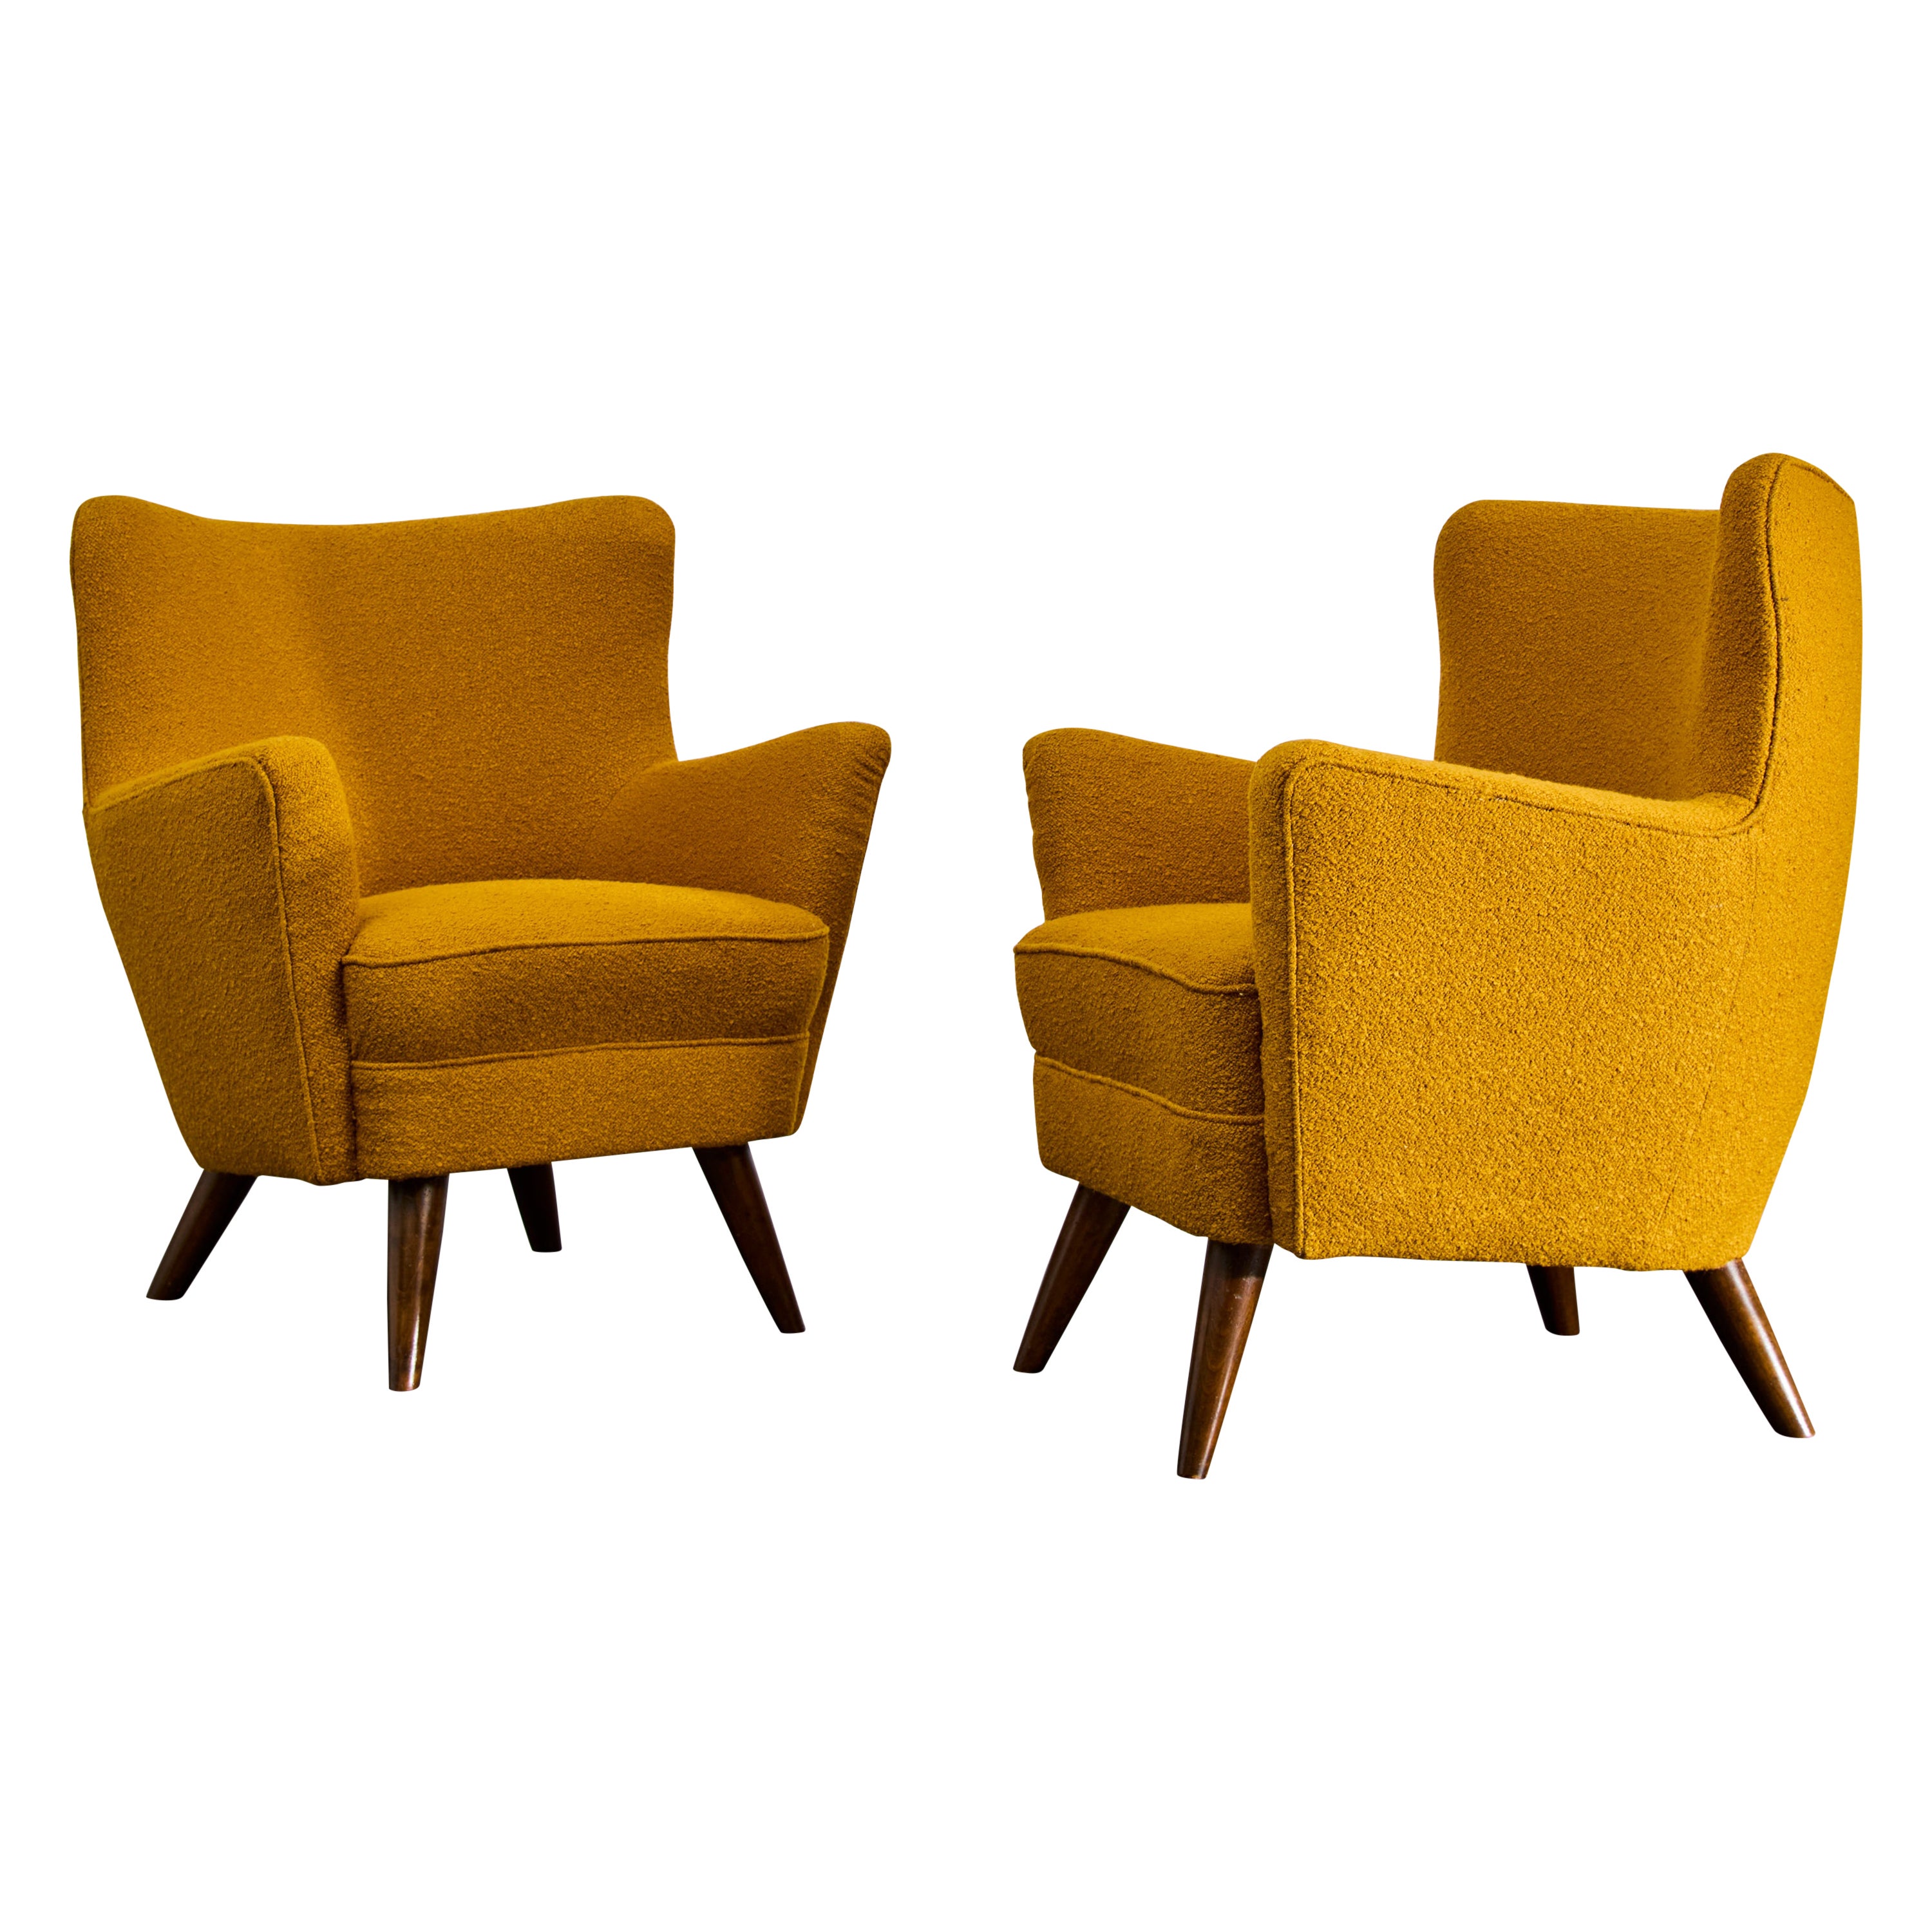 Pair of yellow armchairs designed by Luigi Caccia Dominioni in 1944 For Sale